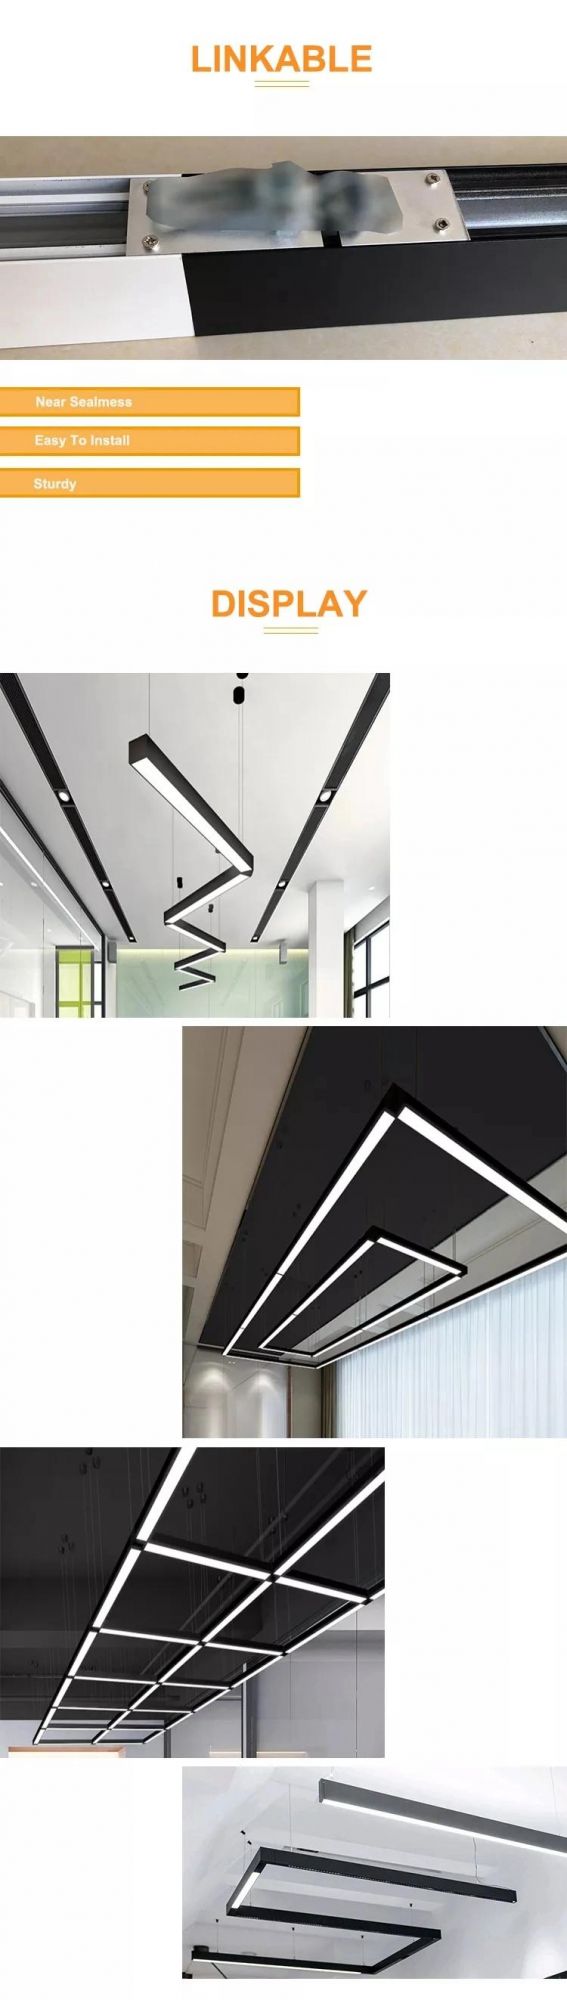 Commercial Office Surface Mounted Ceiling Light for Pendant Light for Linear Strip Lighting System Recessed Linkable LED Linear Light